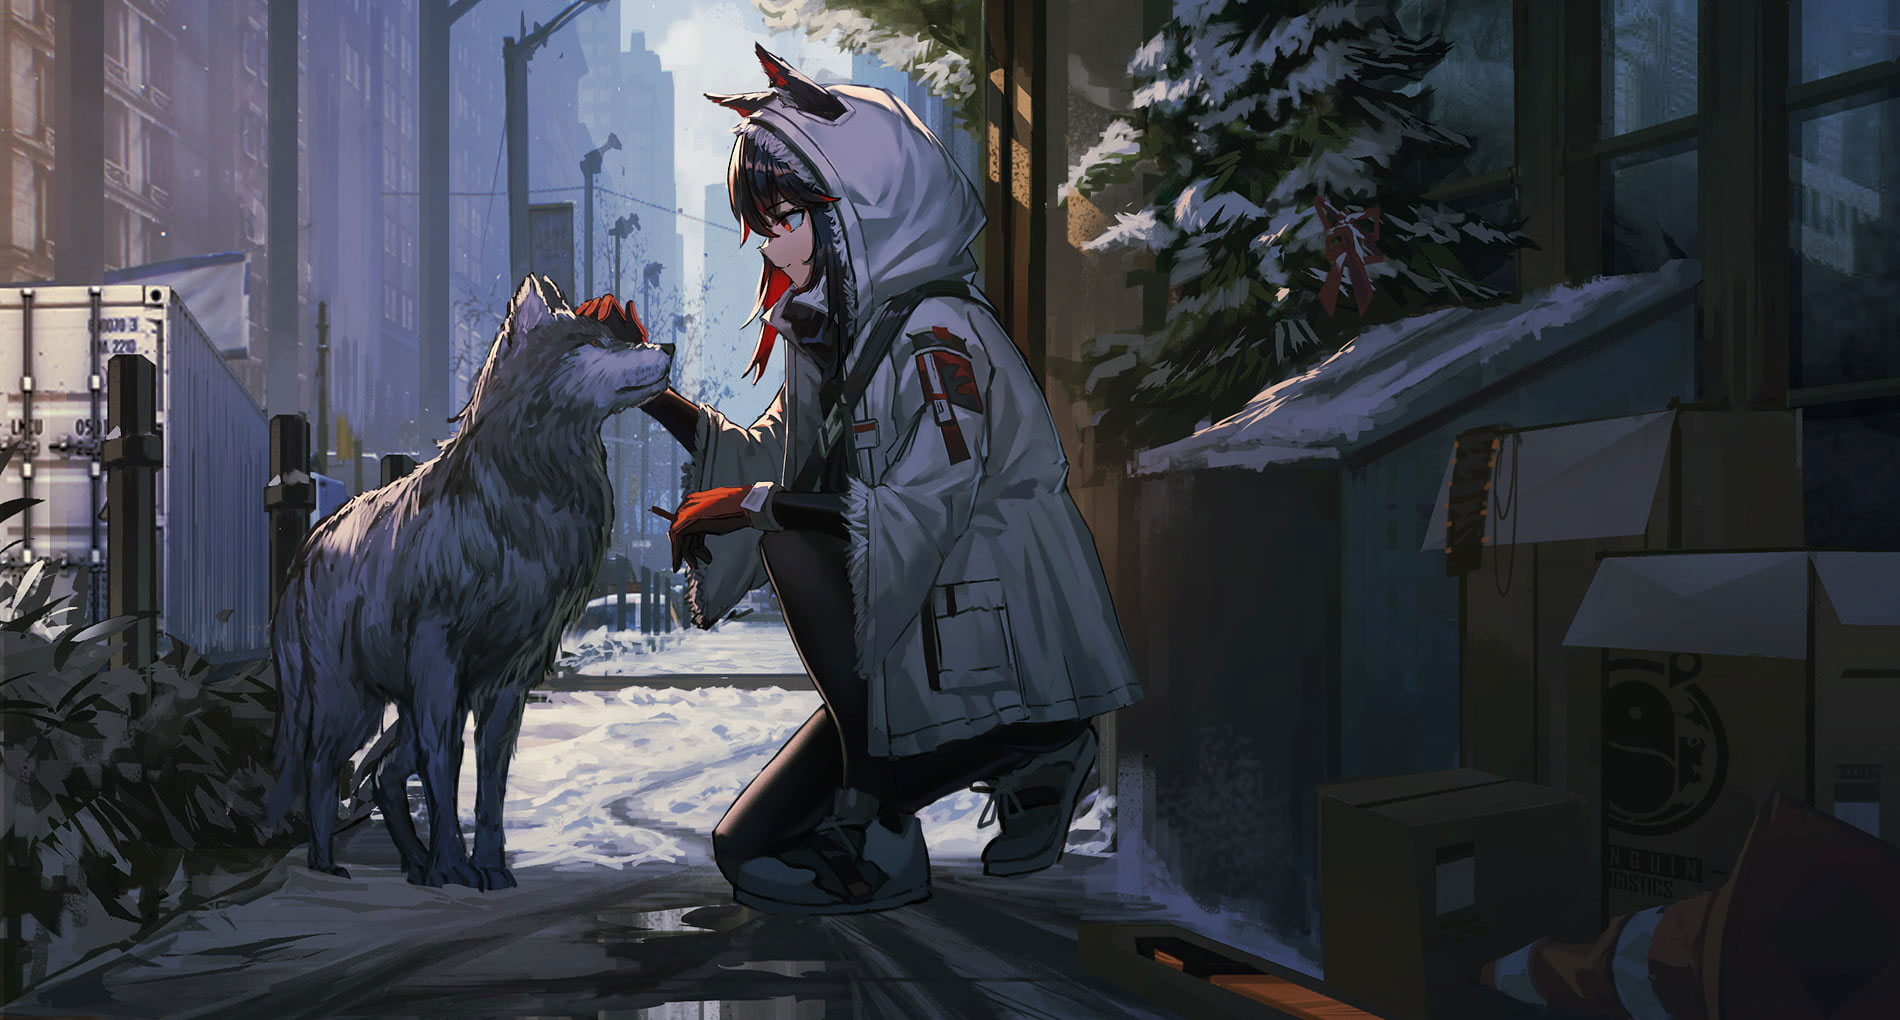 Arknights wallpaper, animal ears, wolf, snow, coats, smiling, city, trash